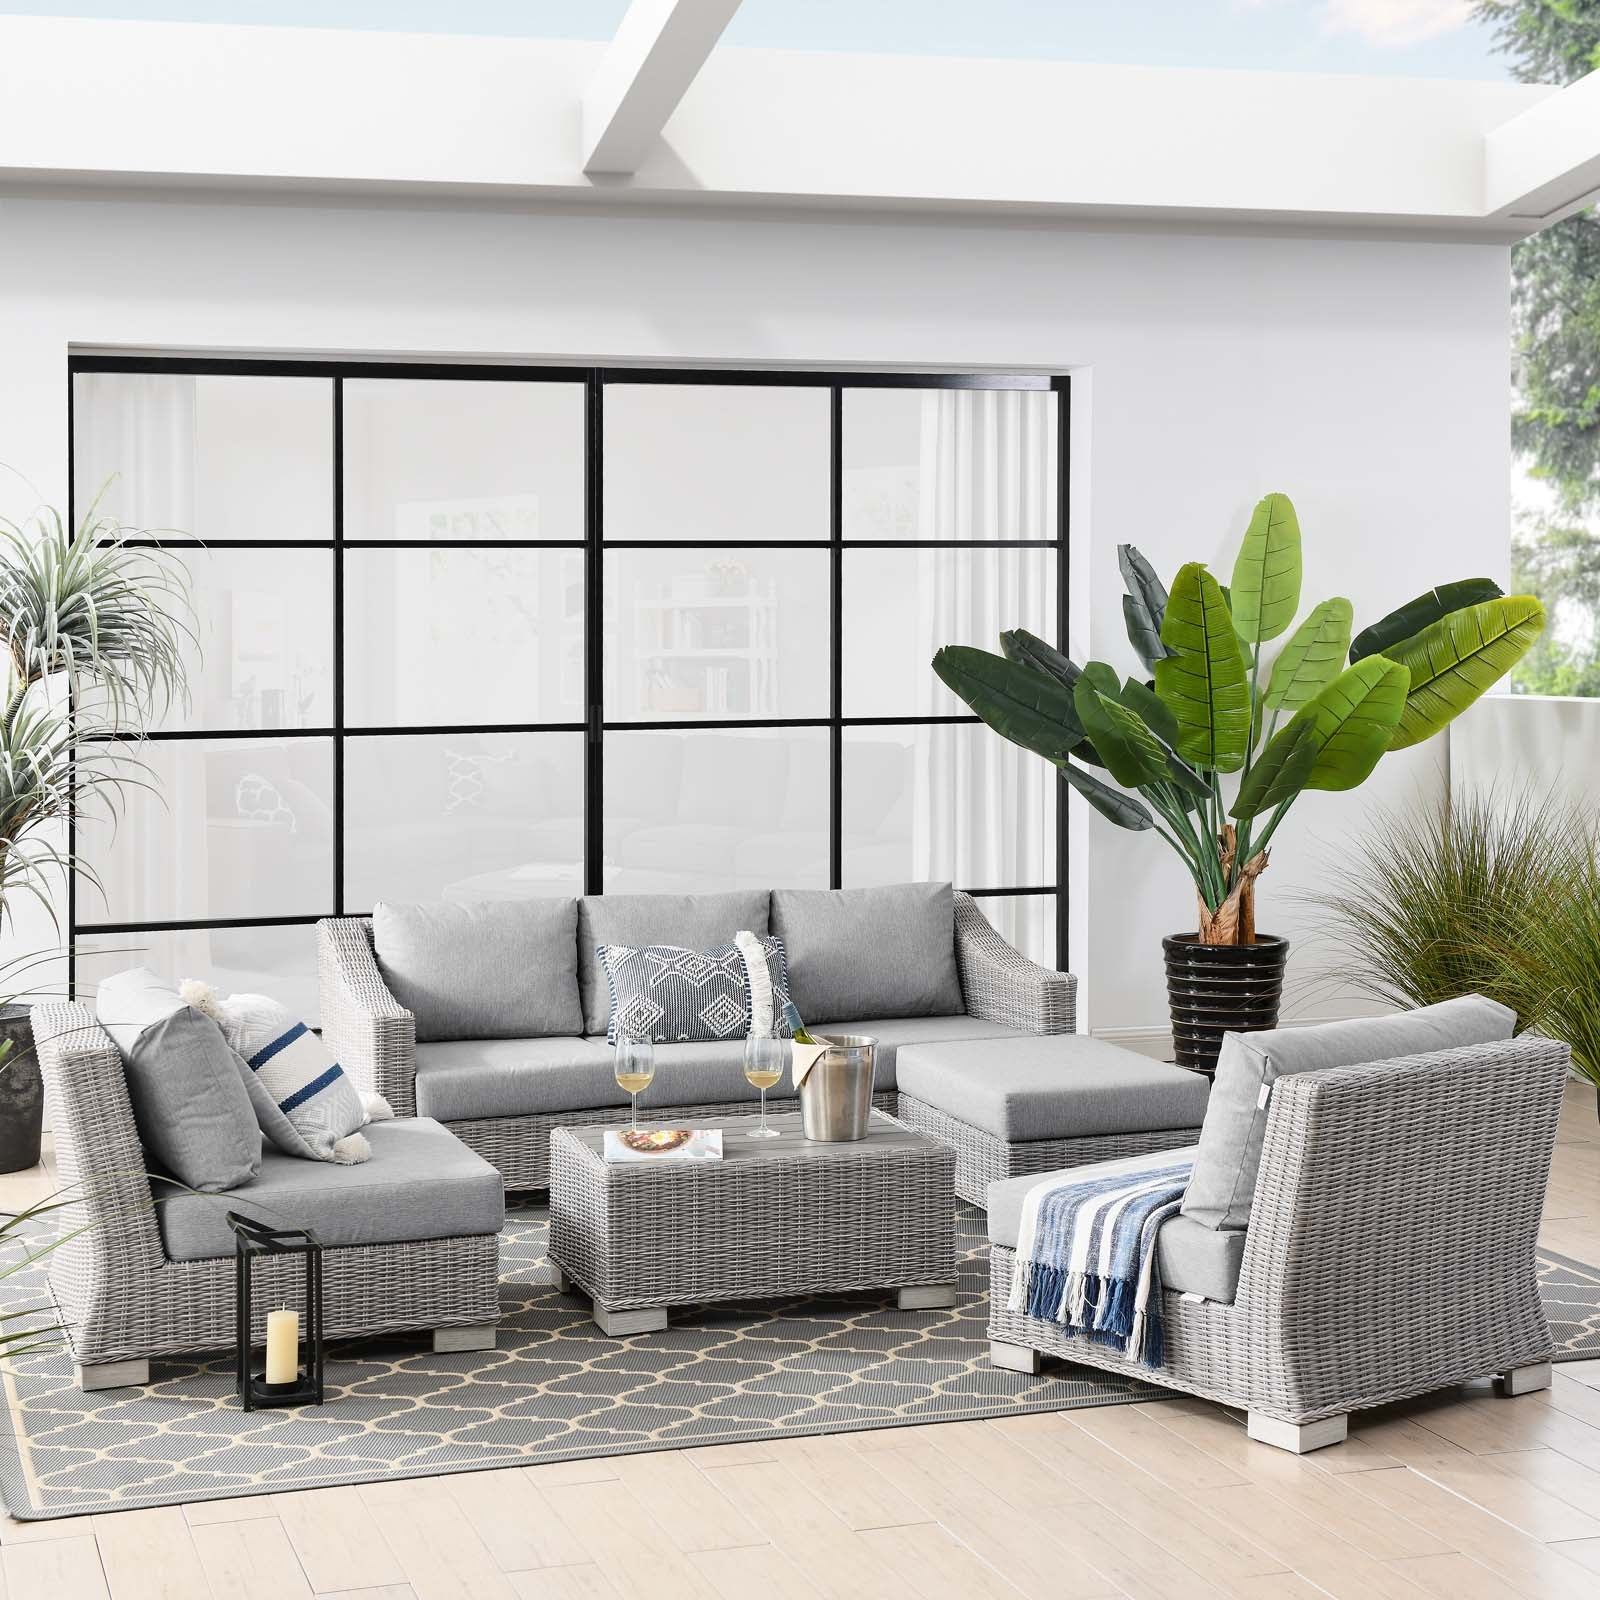 Conway 5-Piece Outdoor Patio Wicker Rattan Furniture Set - East Shore Modern Home Furnishings